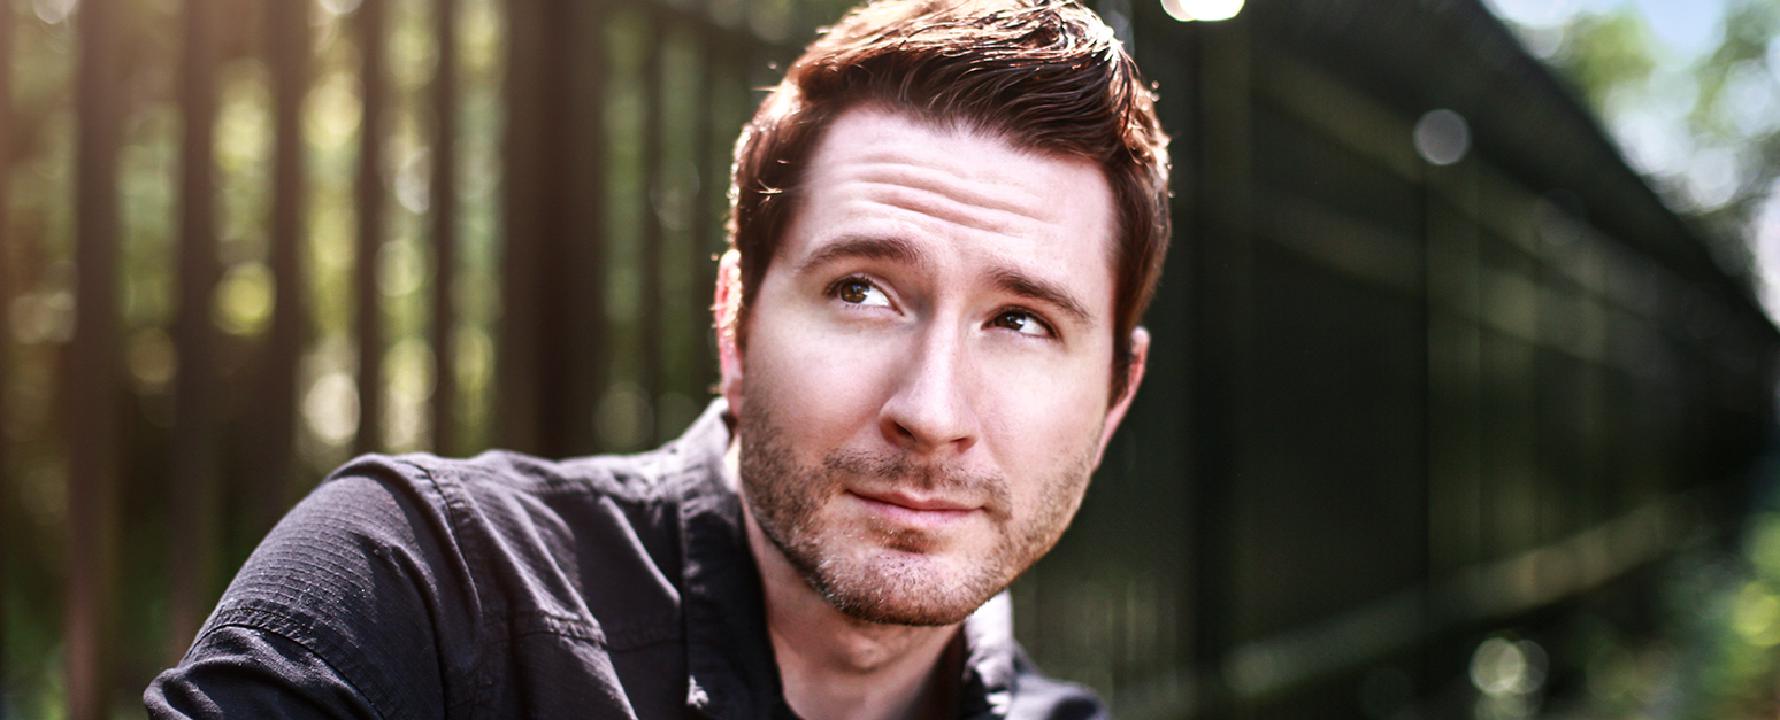 Promotional photograph of Owl City.